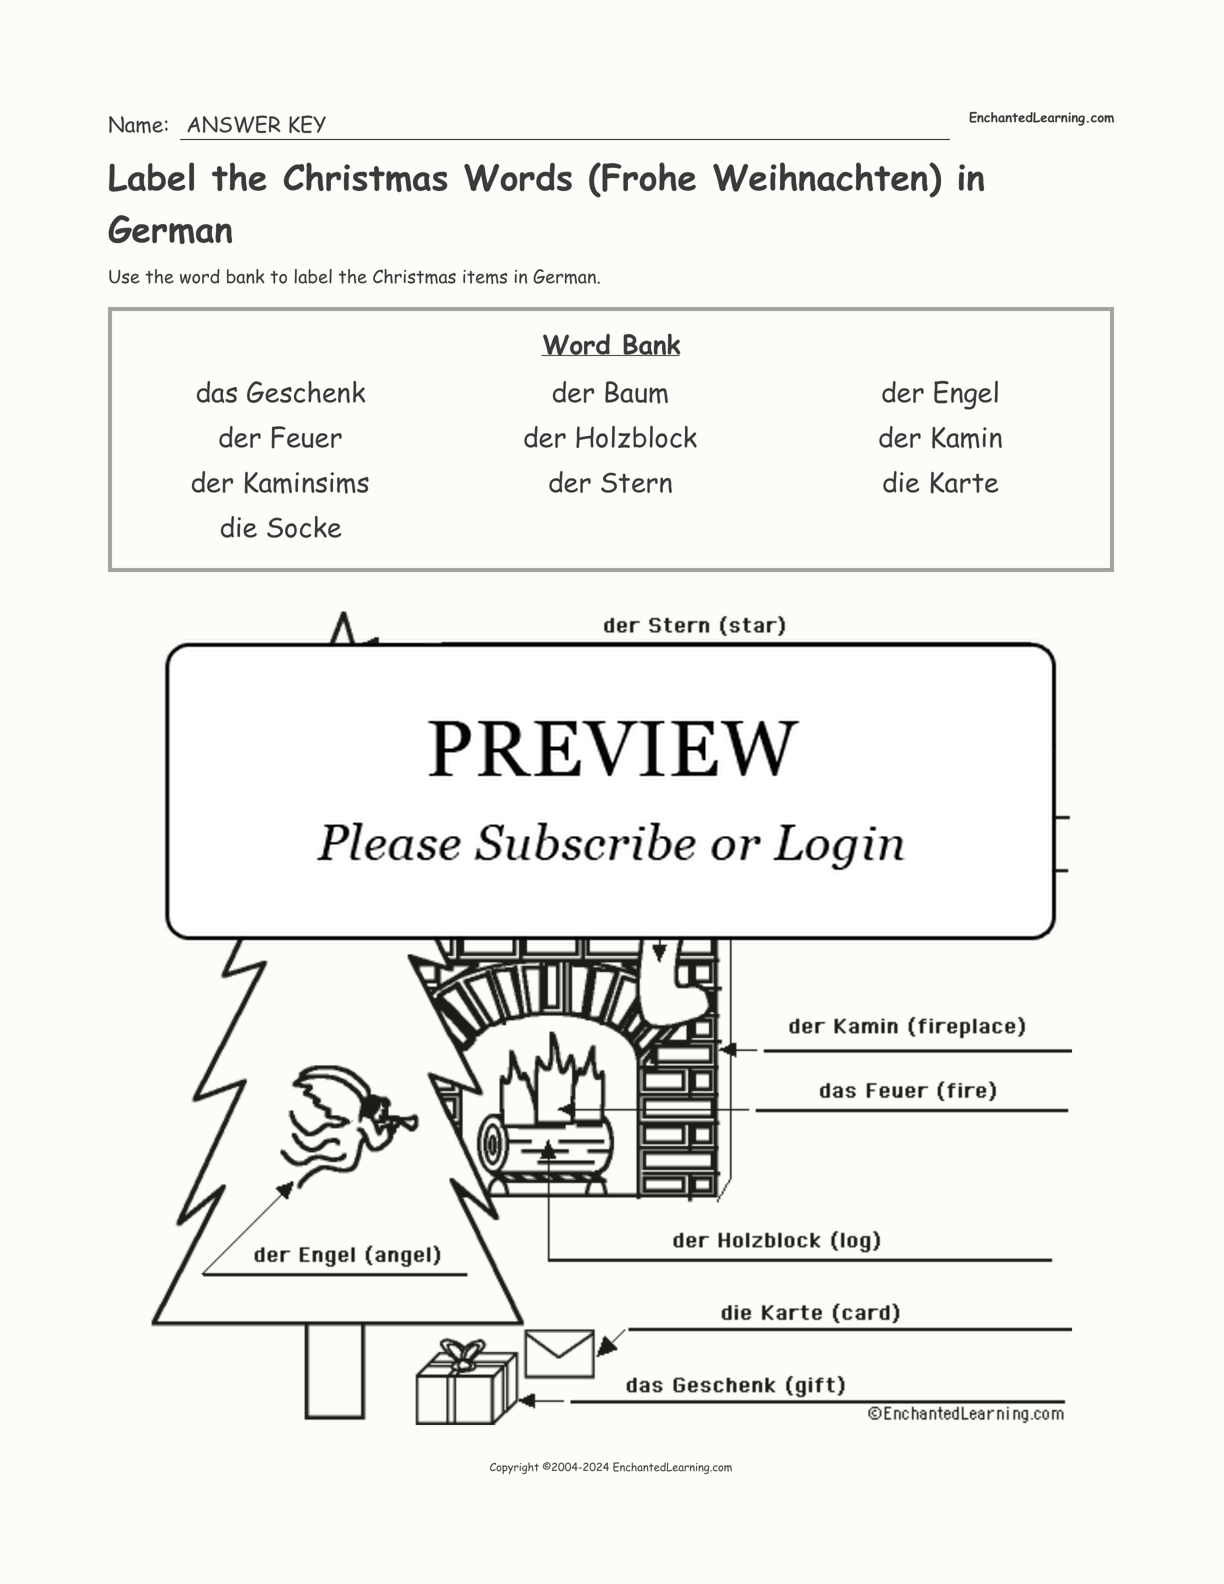 Label the Christmas Words (Frohe Weihnachten) in German interactive worksheet page 2